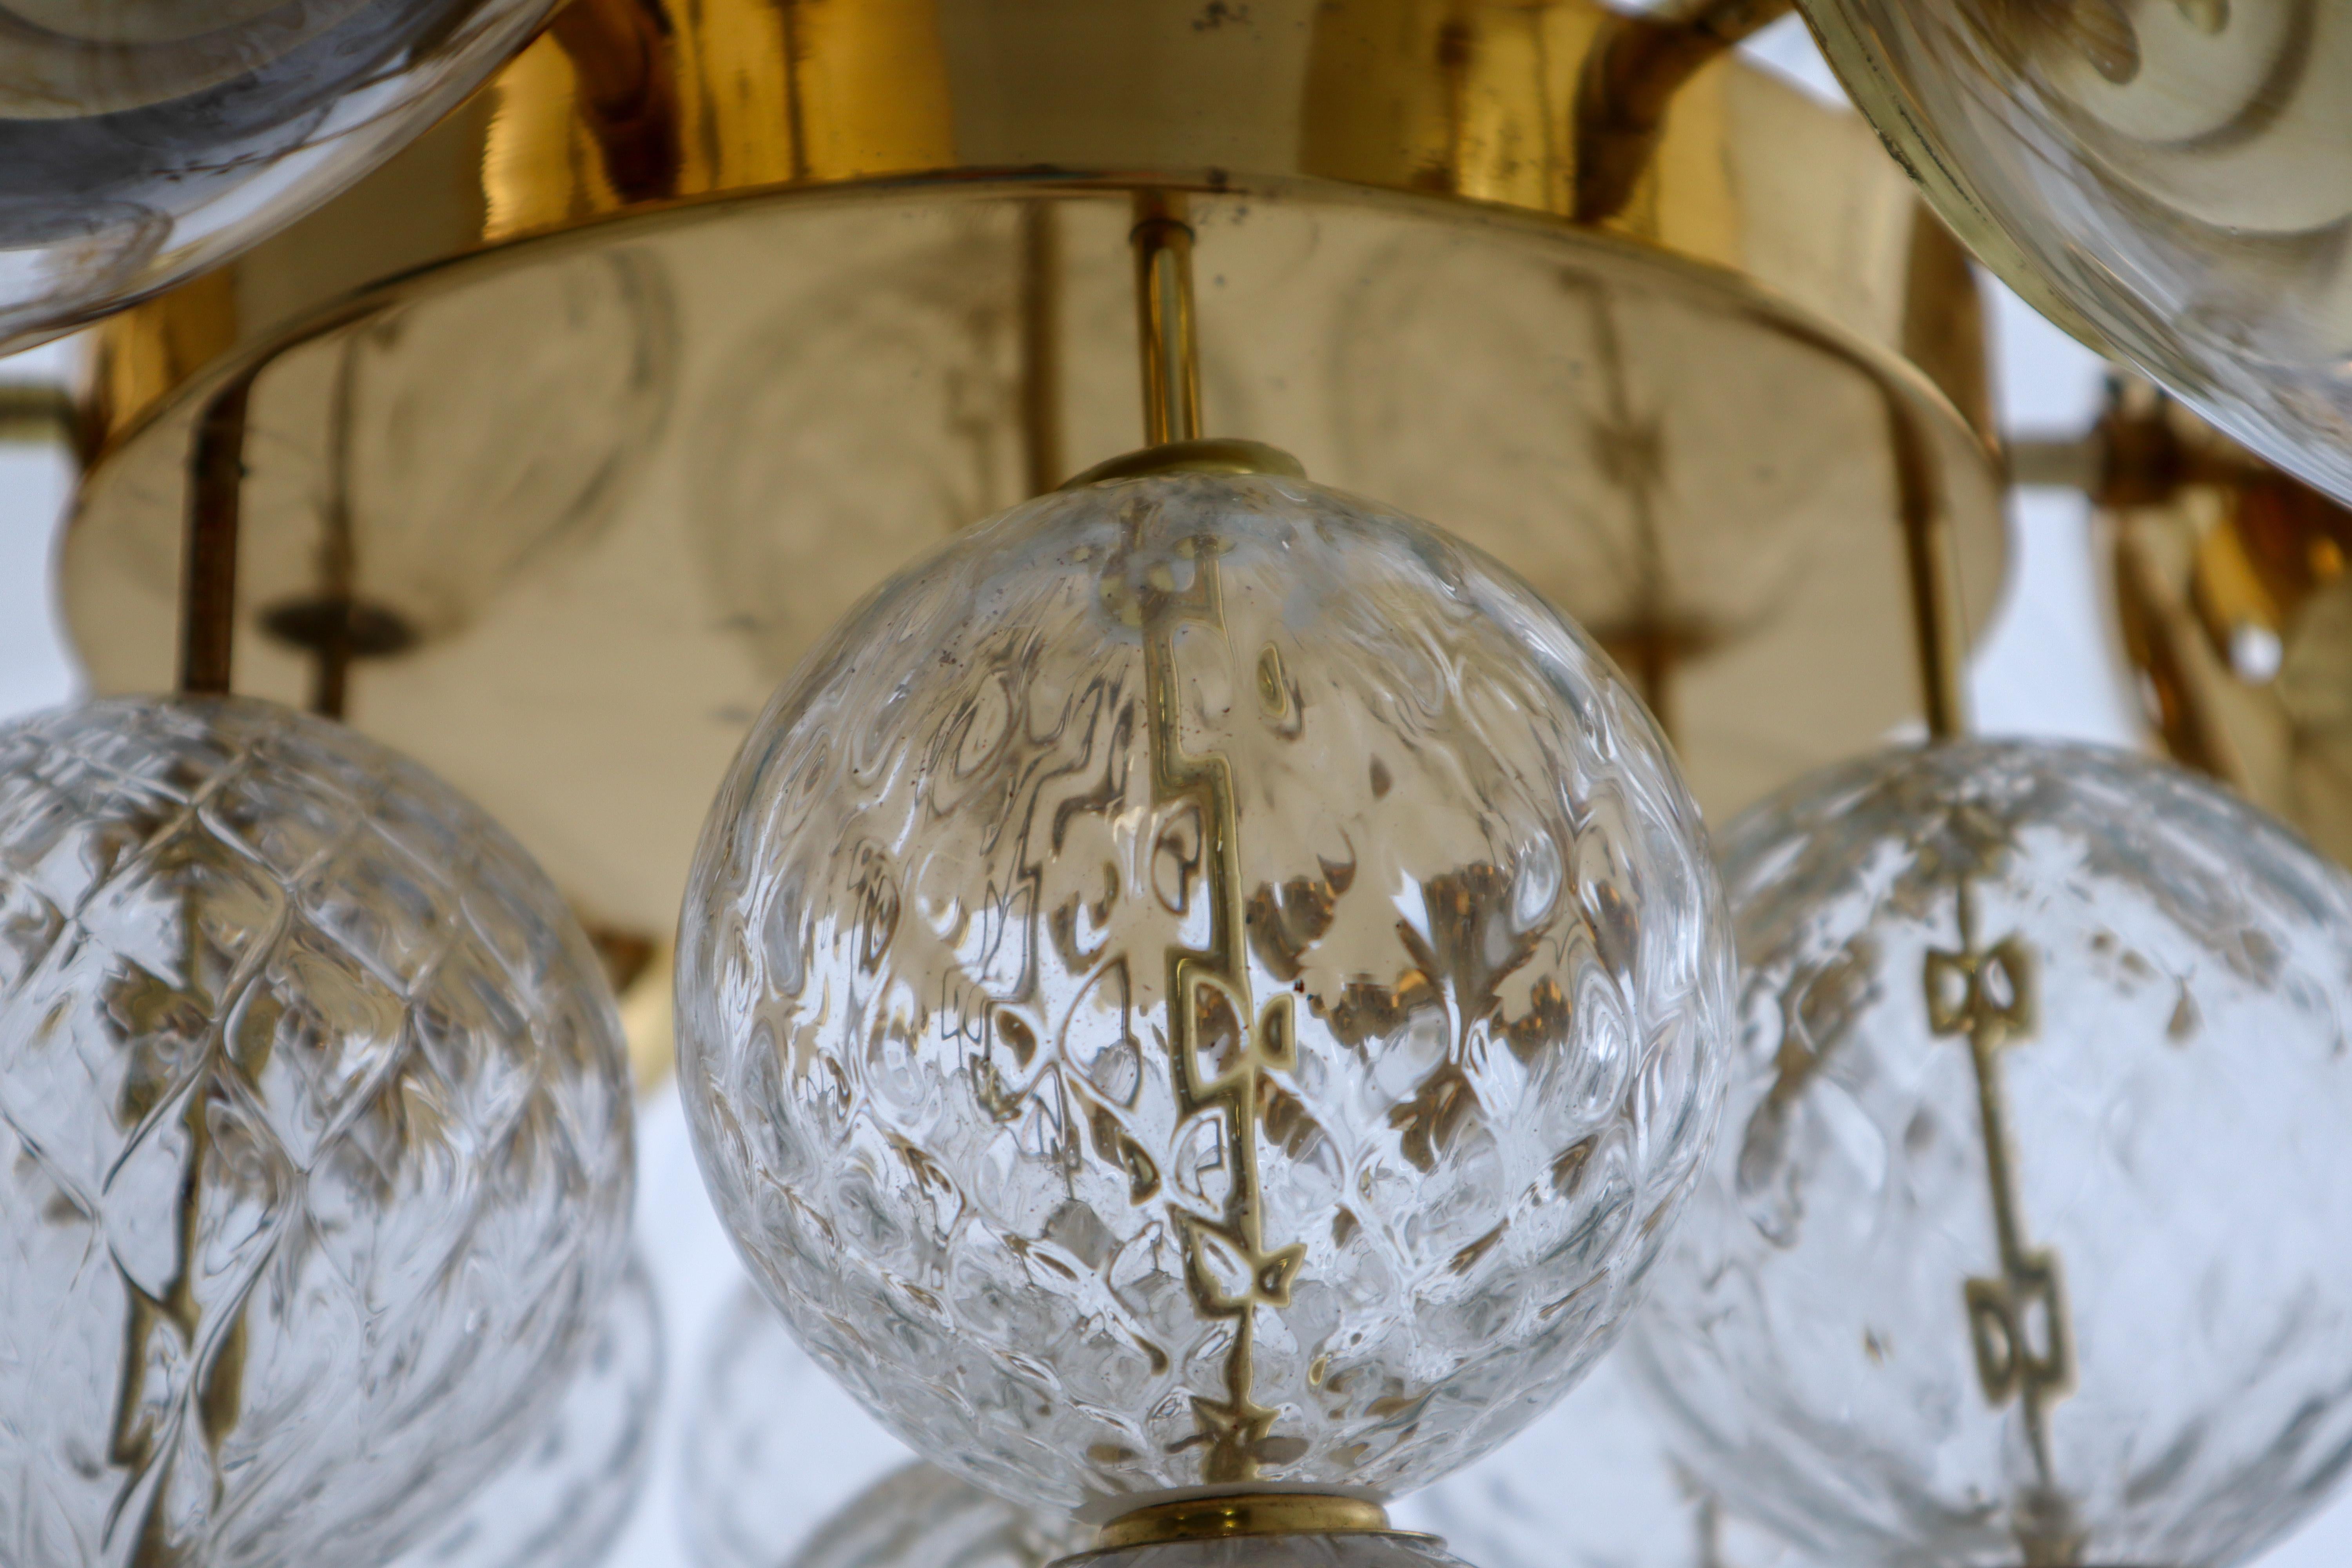 Midcentury Chandeliers with Brass Fixture and Hand-Blown Glass, Europe 1970s For Sale 4